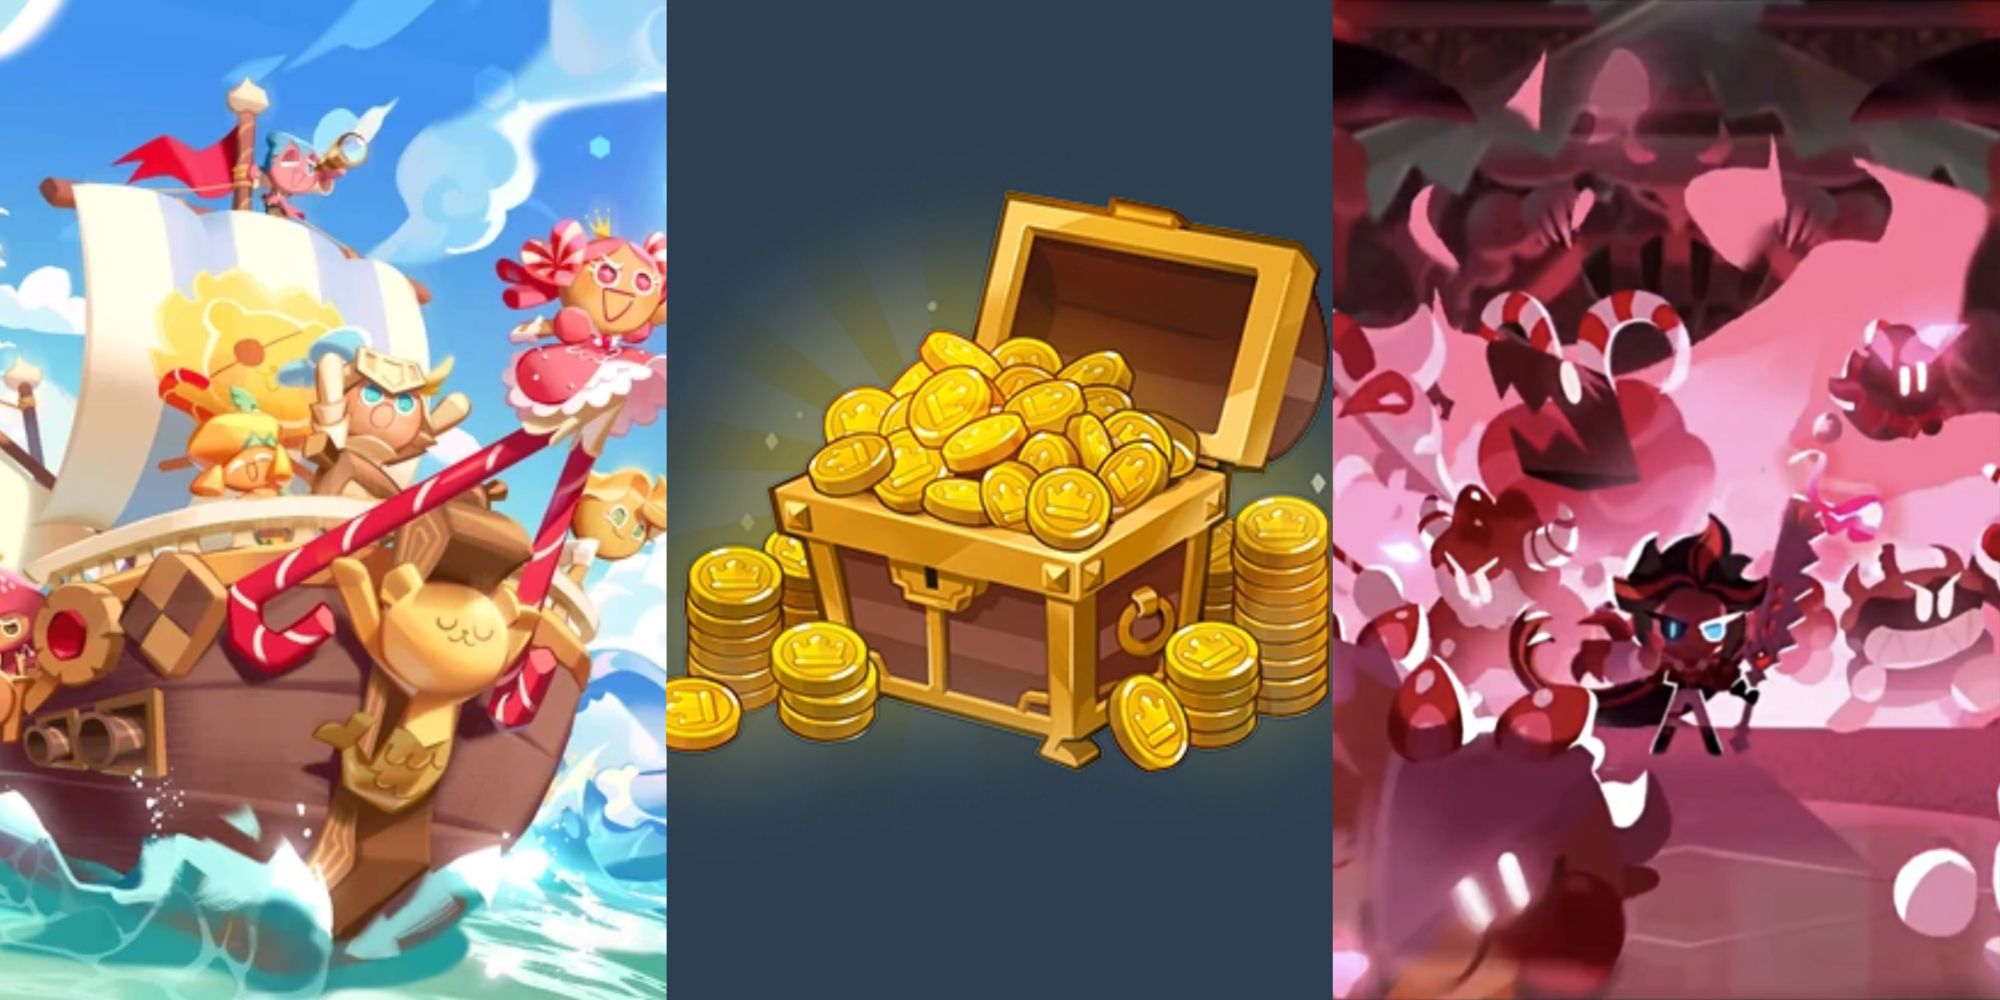 A ship, treasure chest, and scene from Cookie Run Kingdom